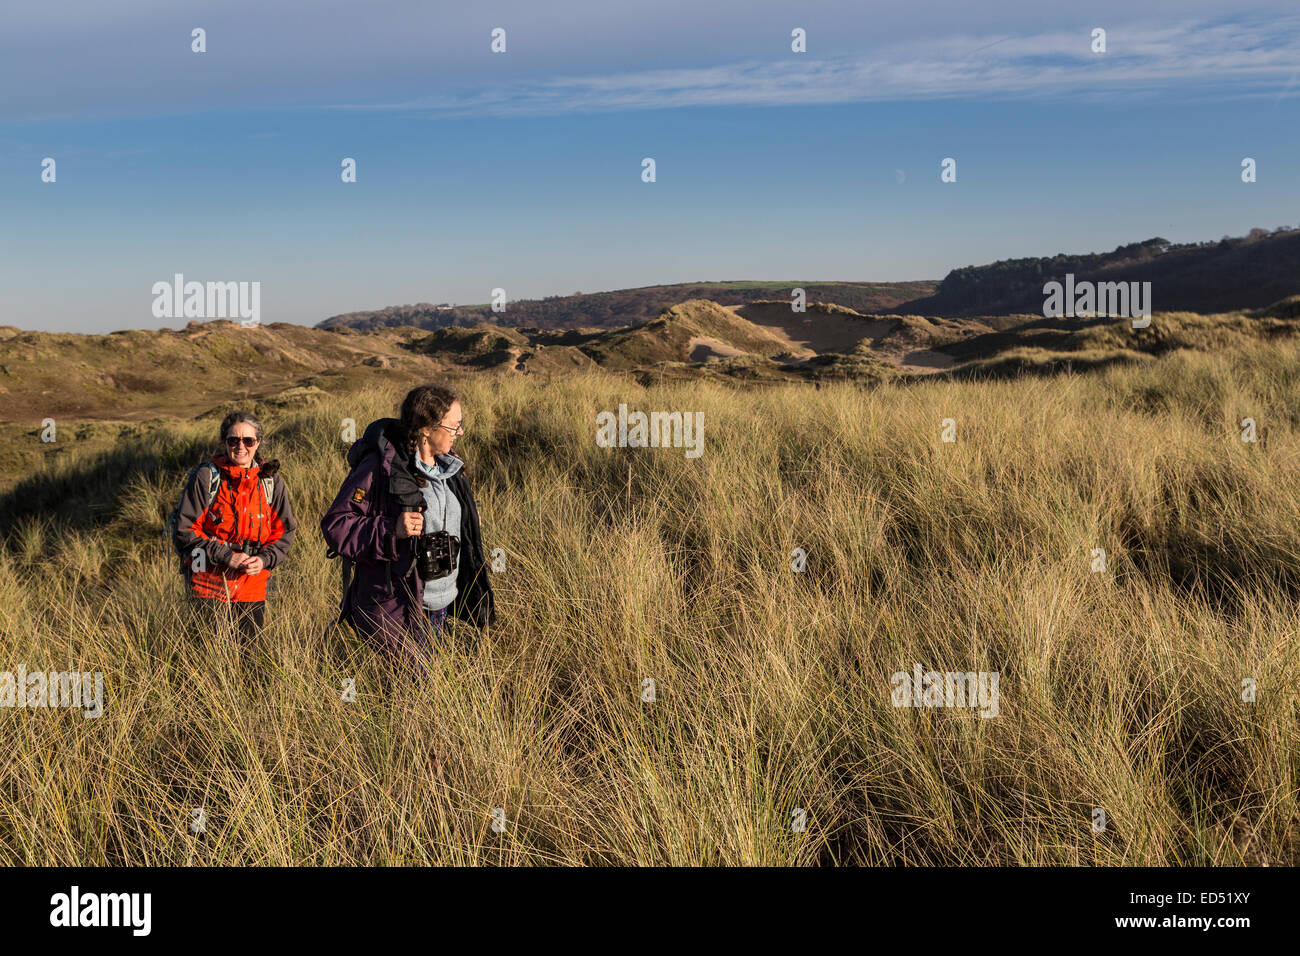 Two women walking through marram grass on the fixed dunes of Merthyr Mawr nature reserve, Wales, UK Stock Photo